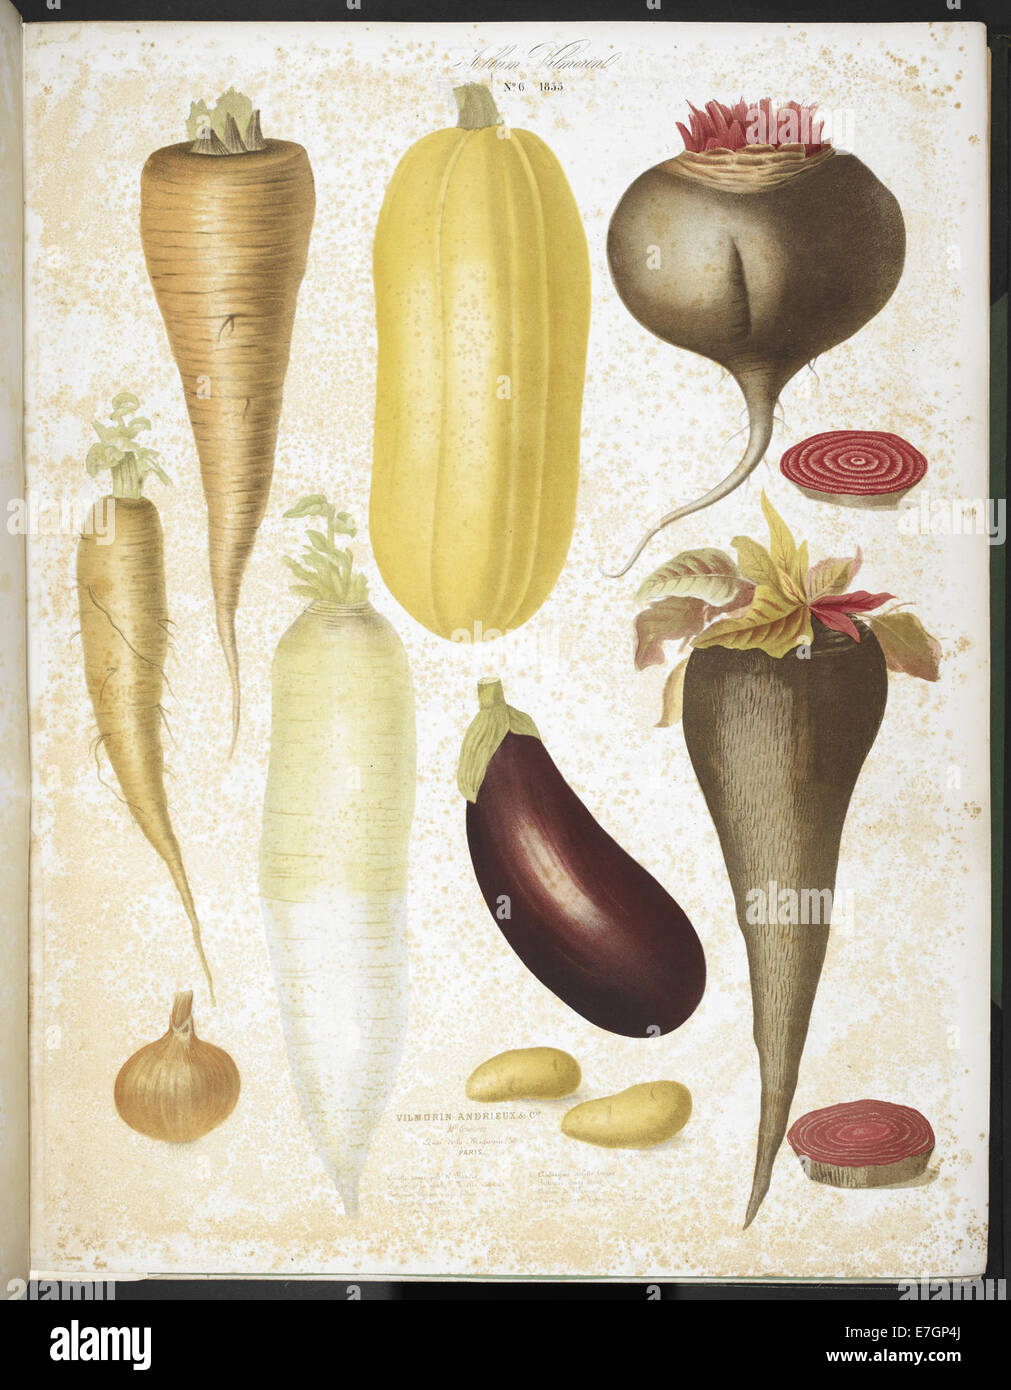 A selection of vegetables, including aubergine, onion, carrot, and potato - Album Vilmorin (1850), plate 6 - BL Stock Photo